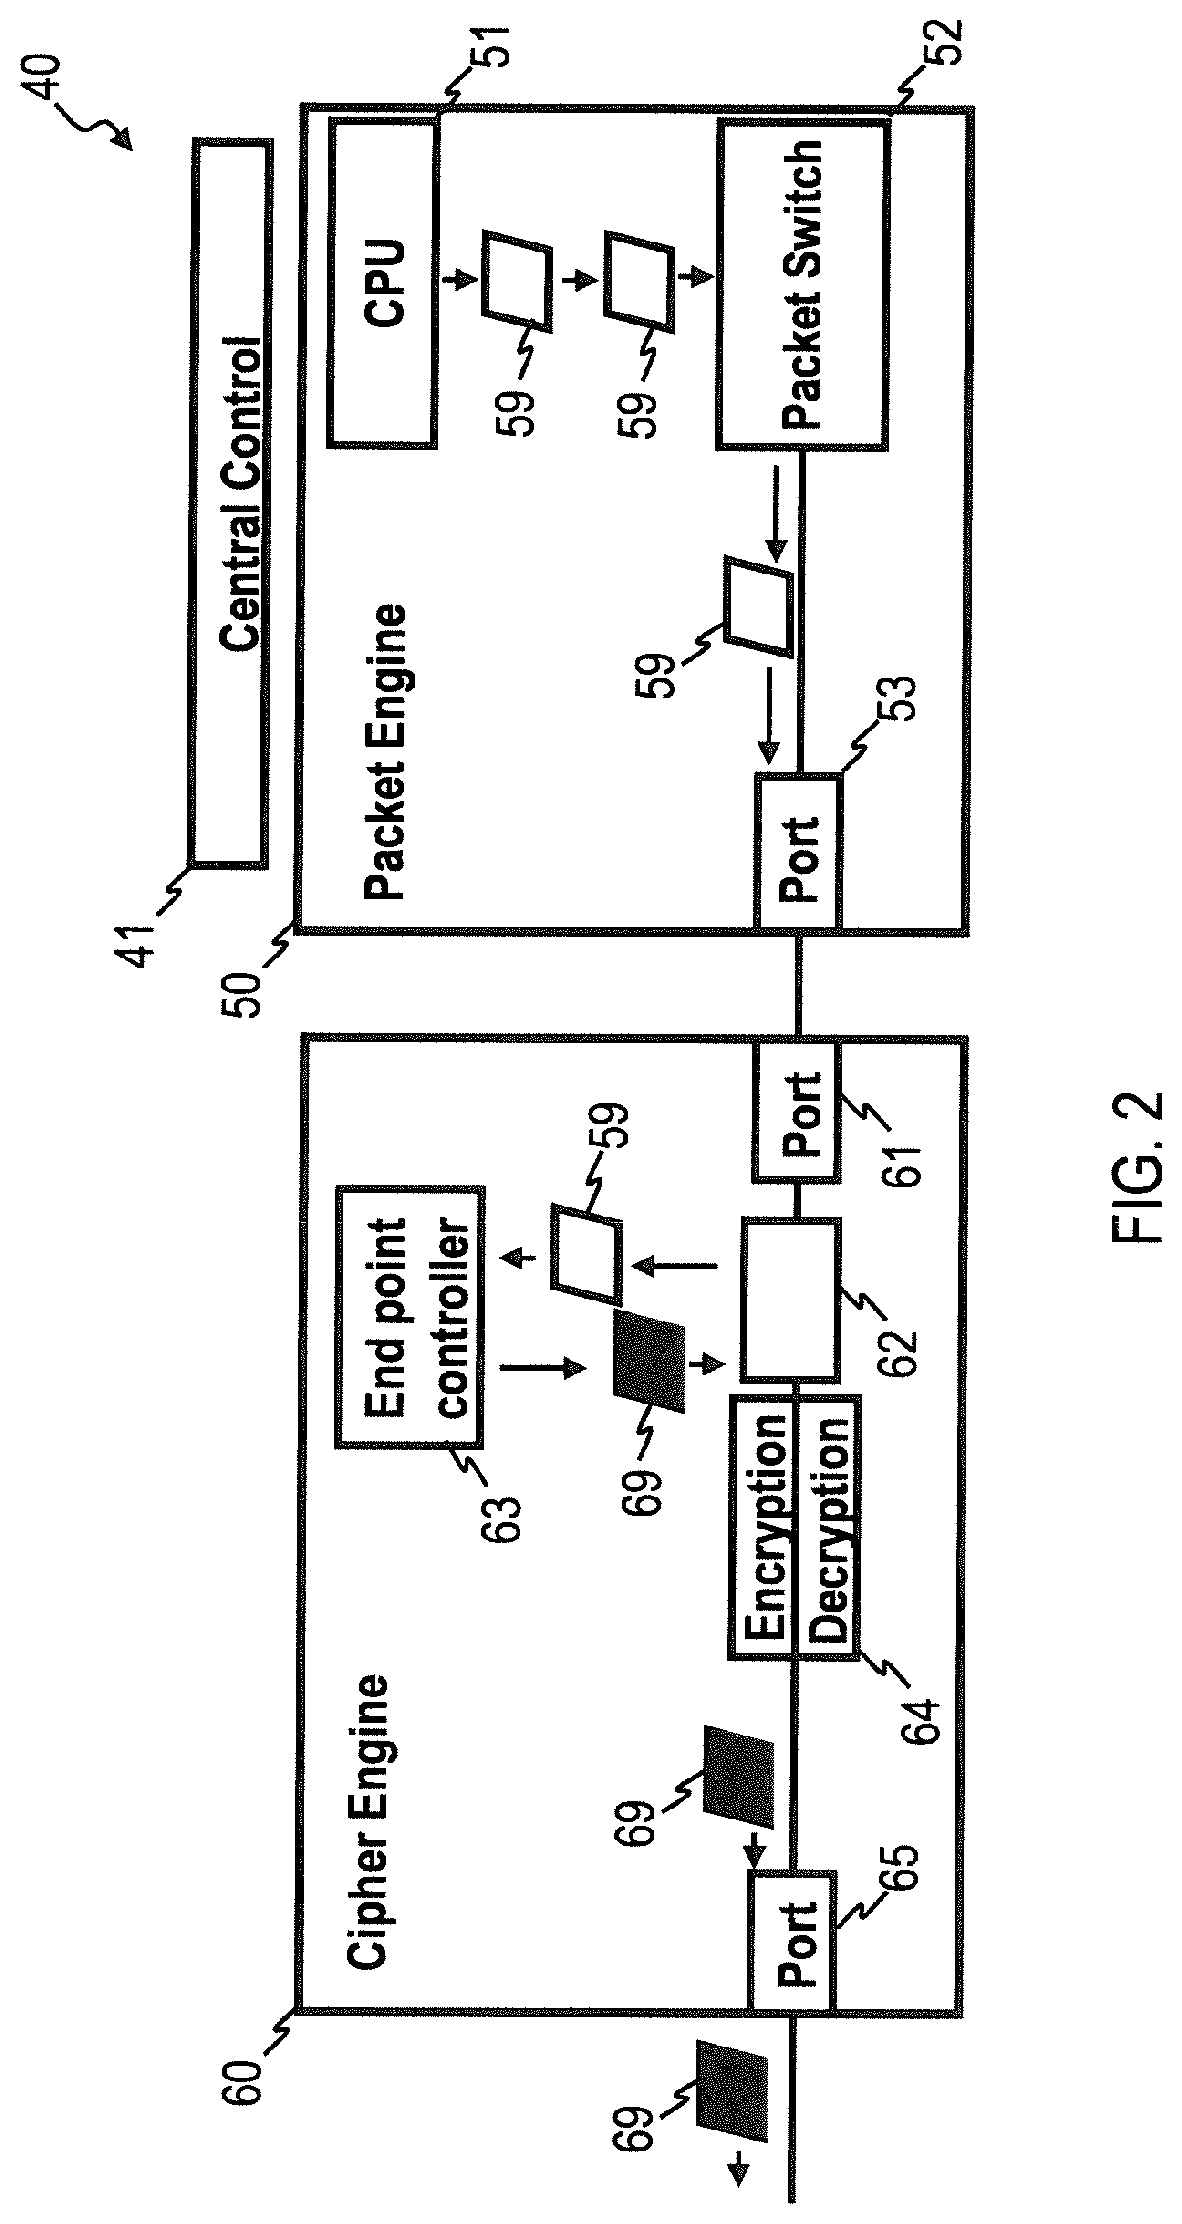 Methods and devices for preserving relative timing and ordering of data packets in a network